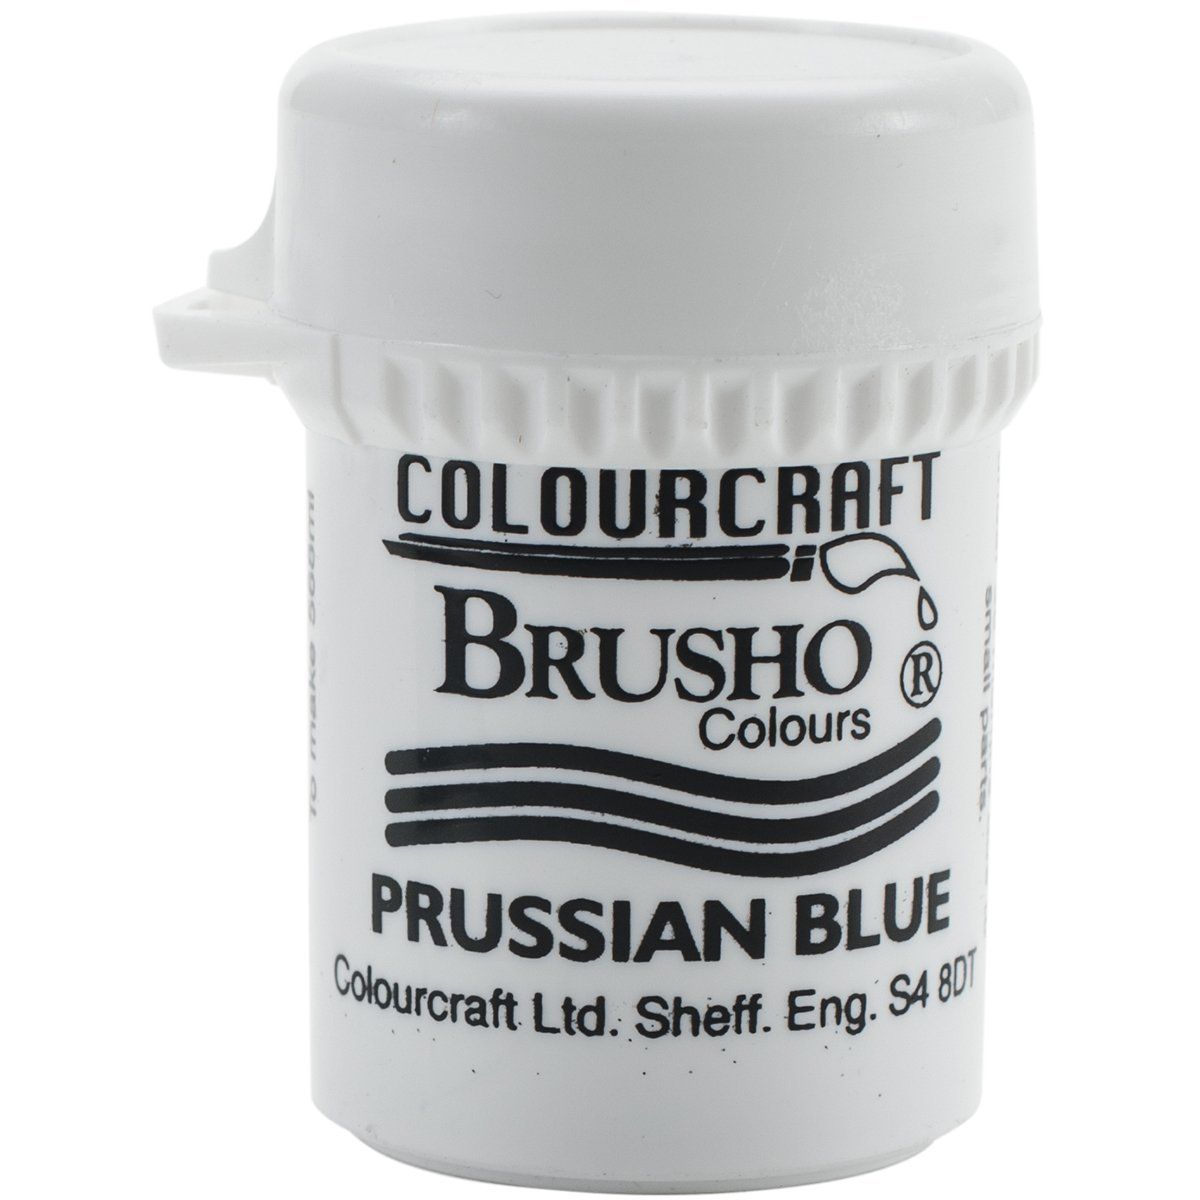 Brusho Crystal Colour - Prussian Blue 15 gm